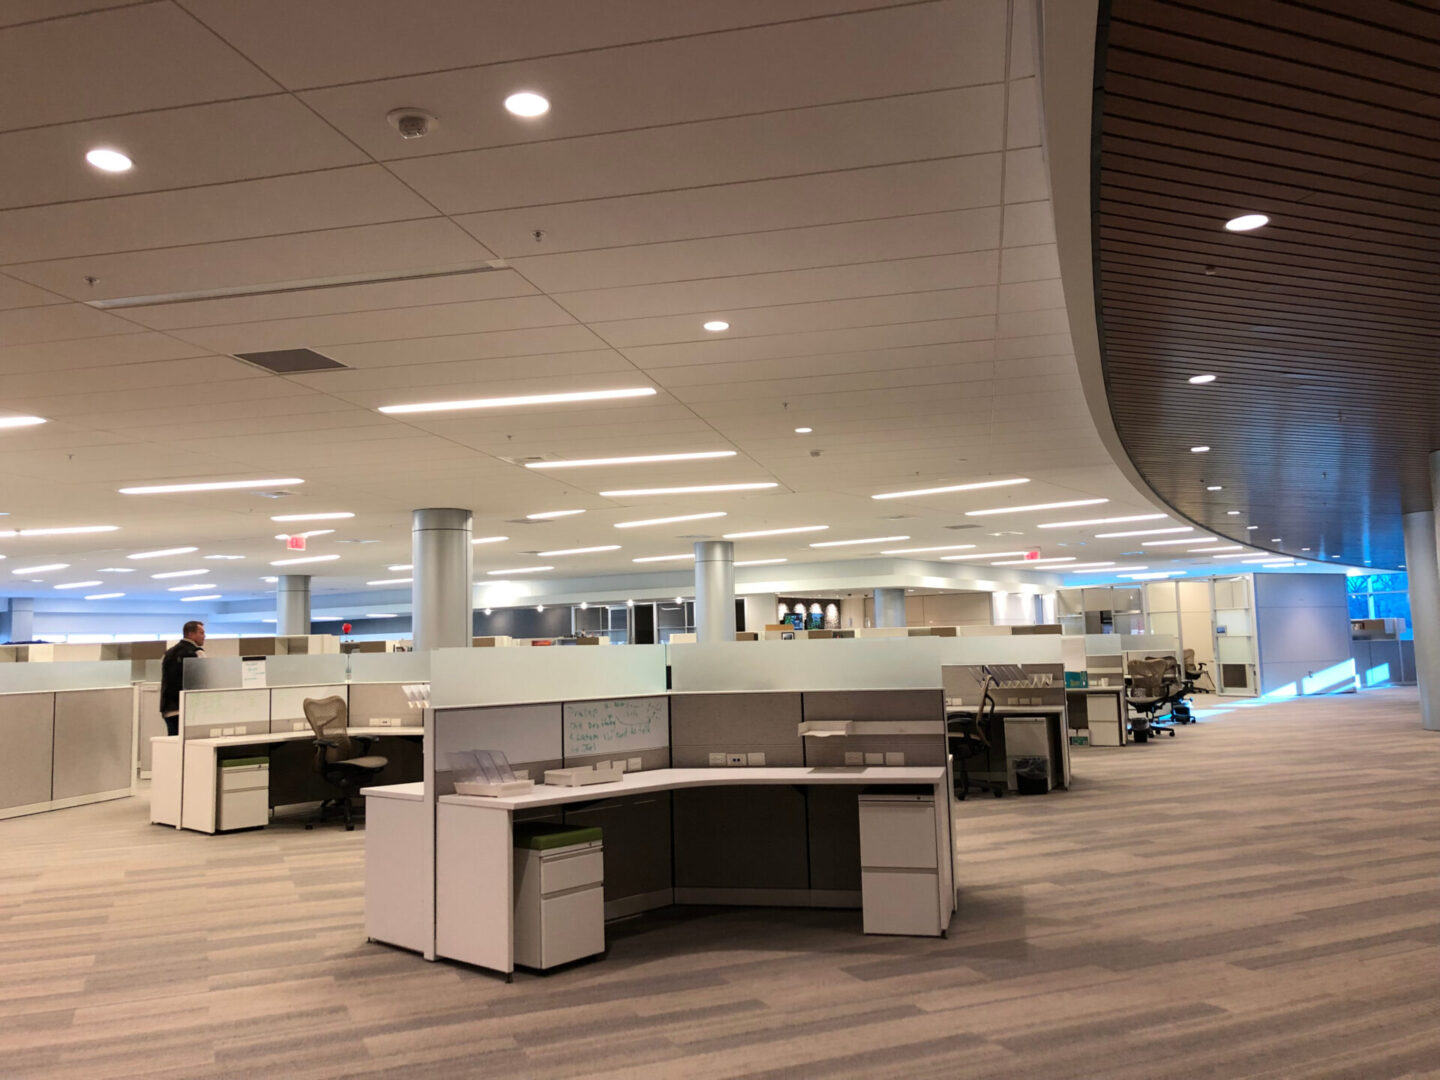 A large open office space with many desks.